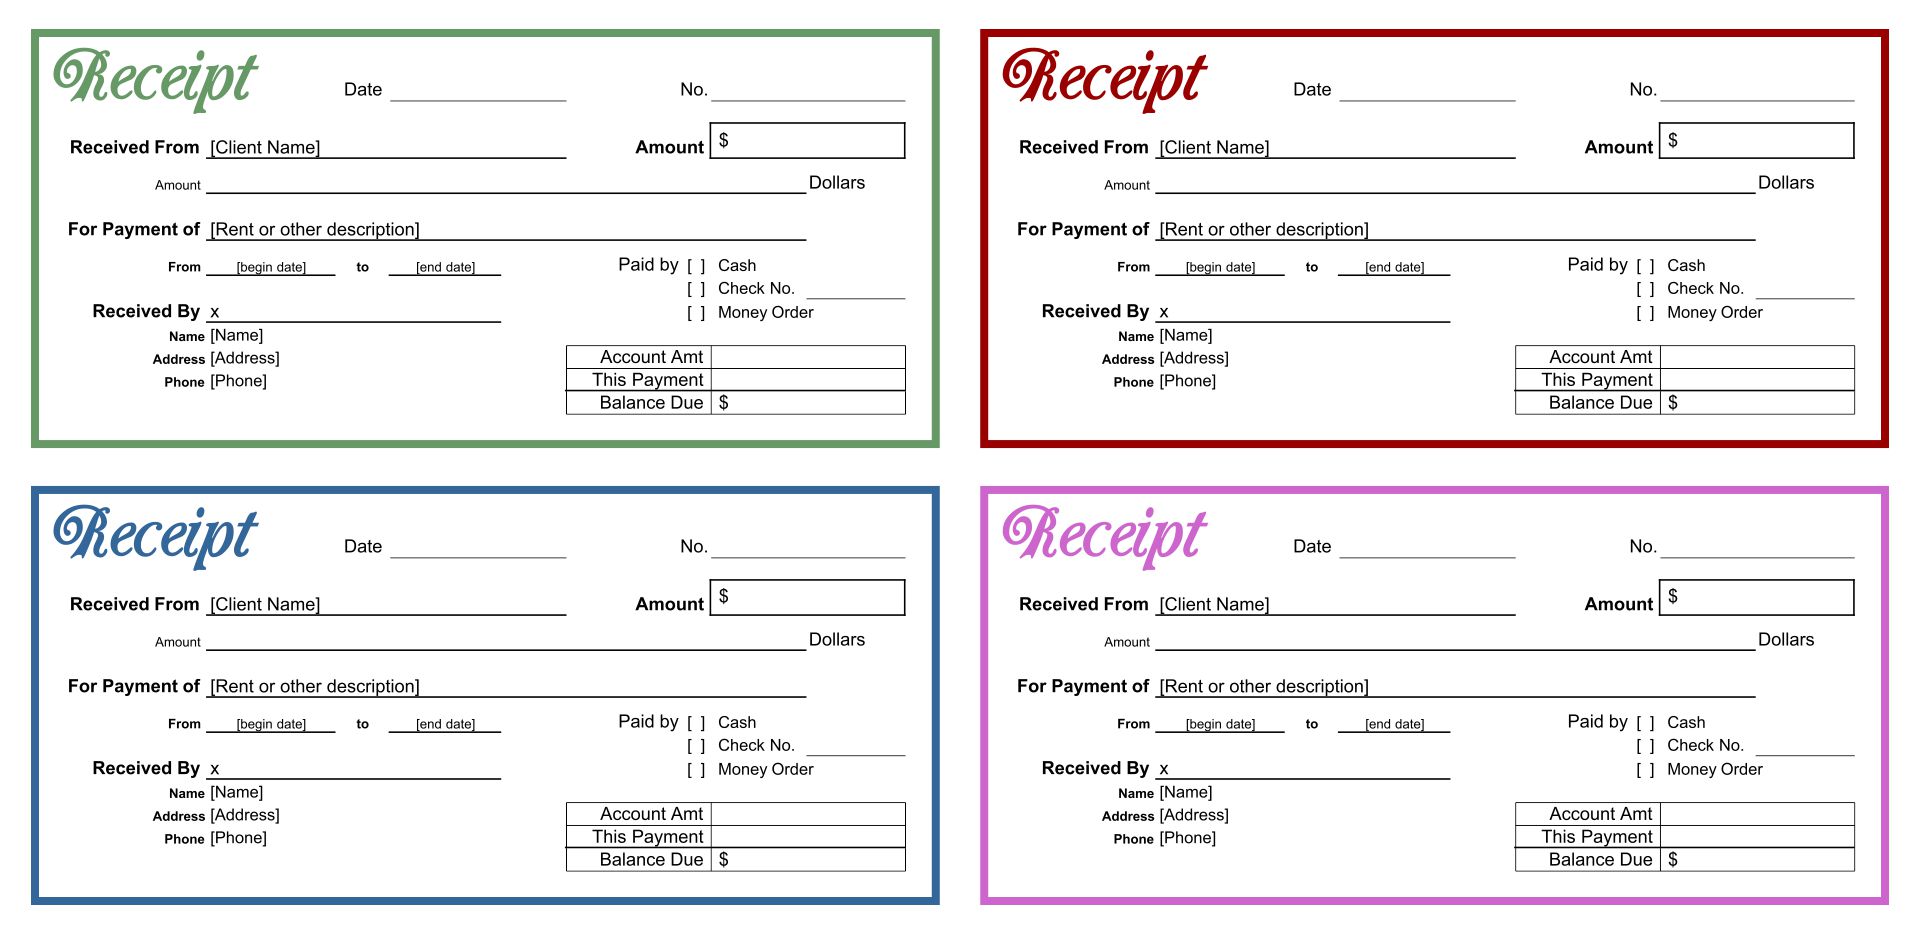 get-receipt-template-pictures-infortant-document